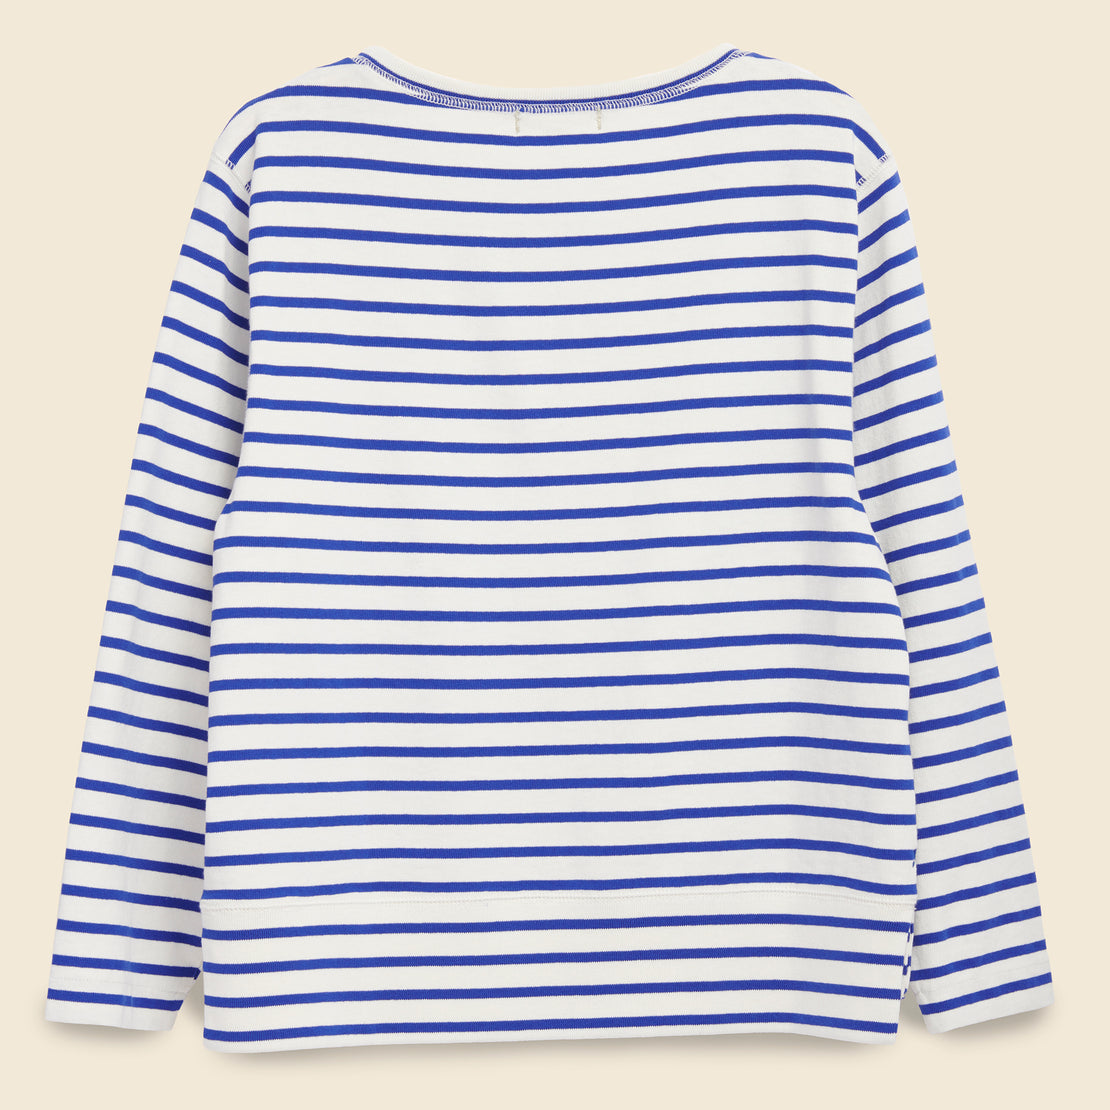 Lakeside Stripe Tee - Natural/Blue - Alex Mill - STAG Provisions - W - Tops - L/S Knit